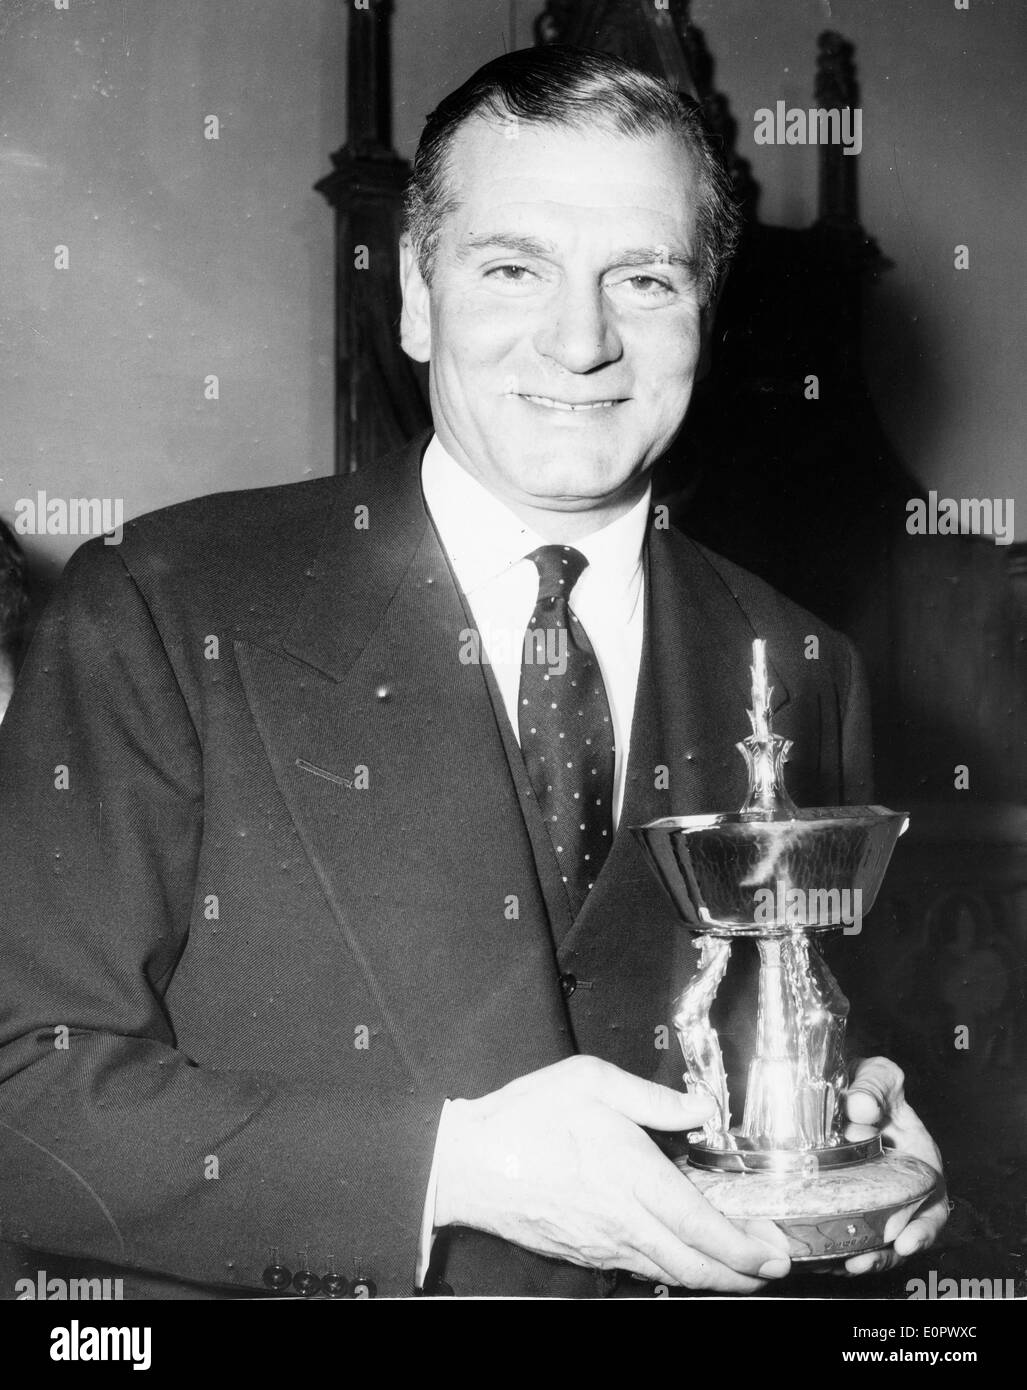 Actor Laurence Olivier with Silver Pears Trophy Stock Photo